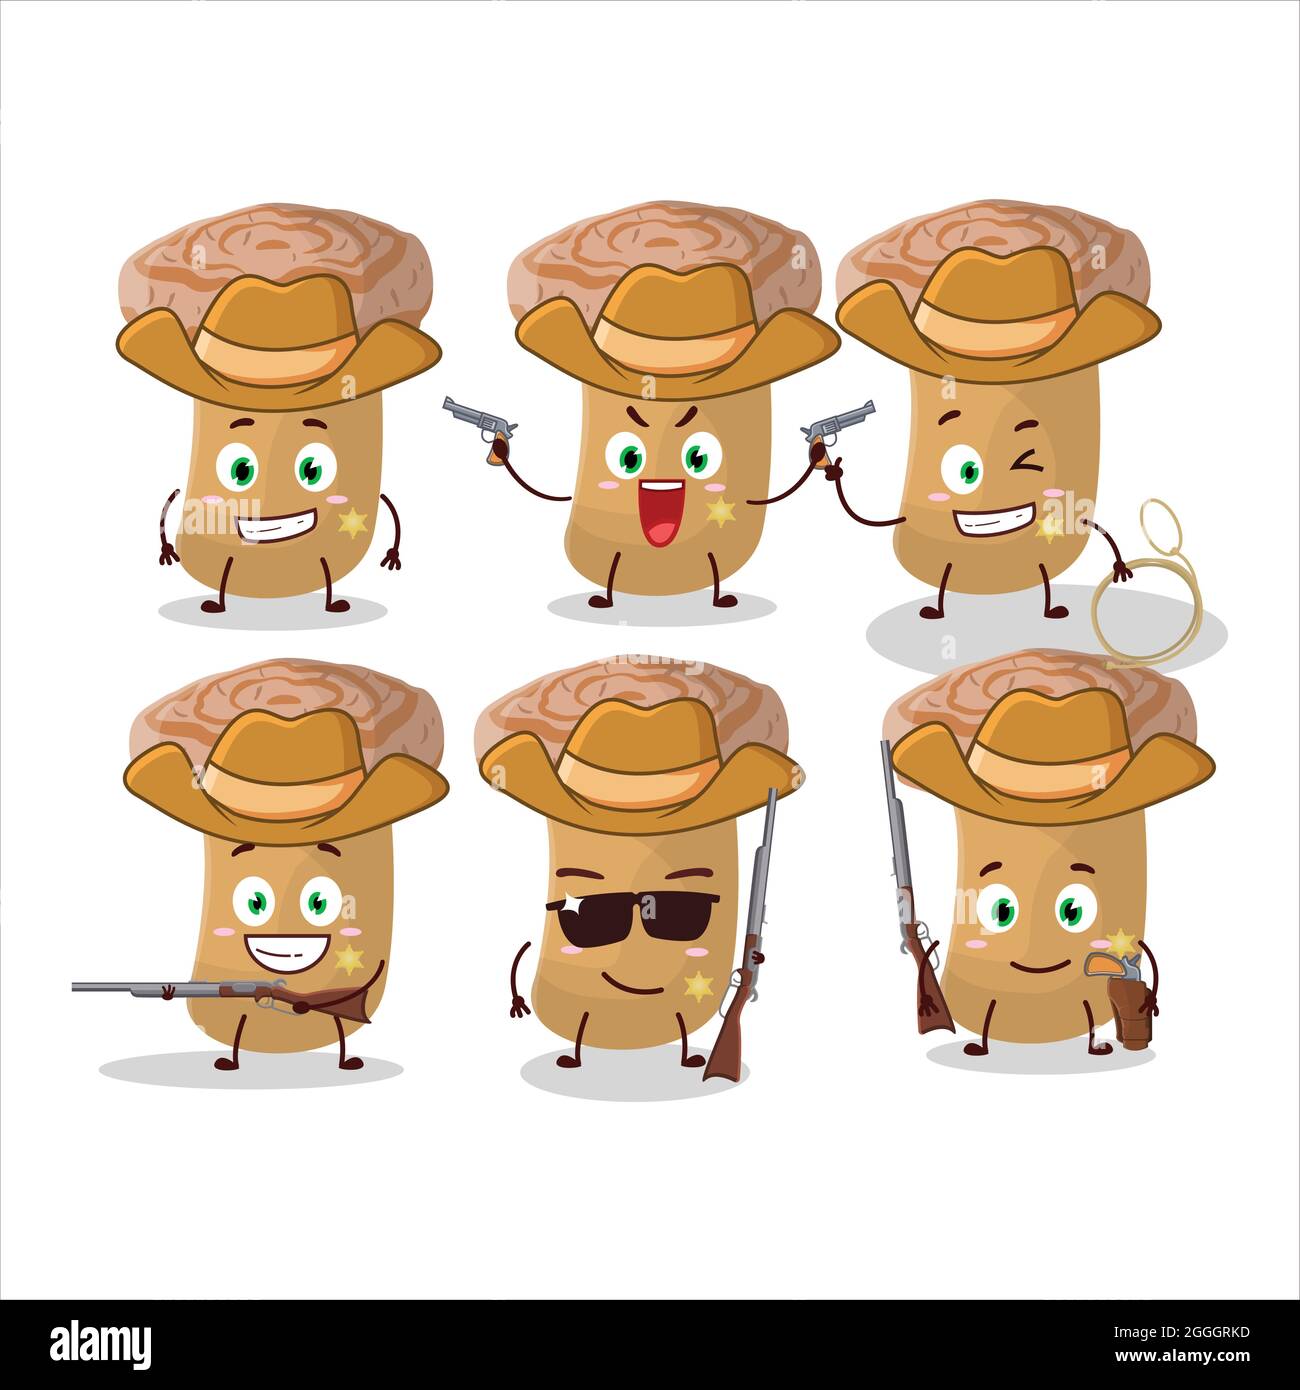 Cool cowboy woolly milkcap cartoon character with a cute hat. Vector illustration Stock Vector